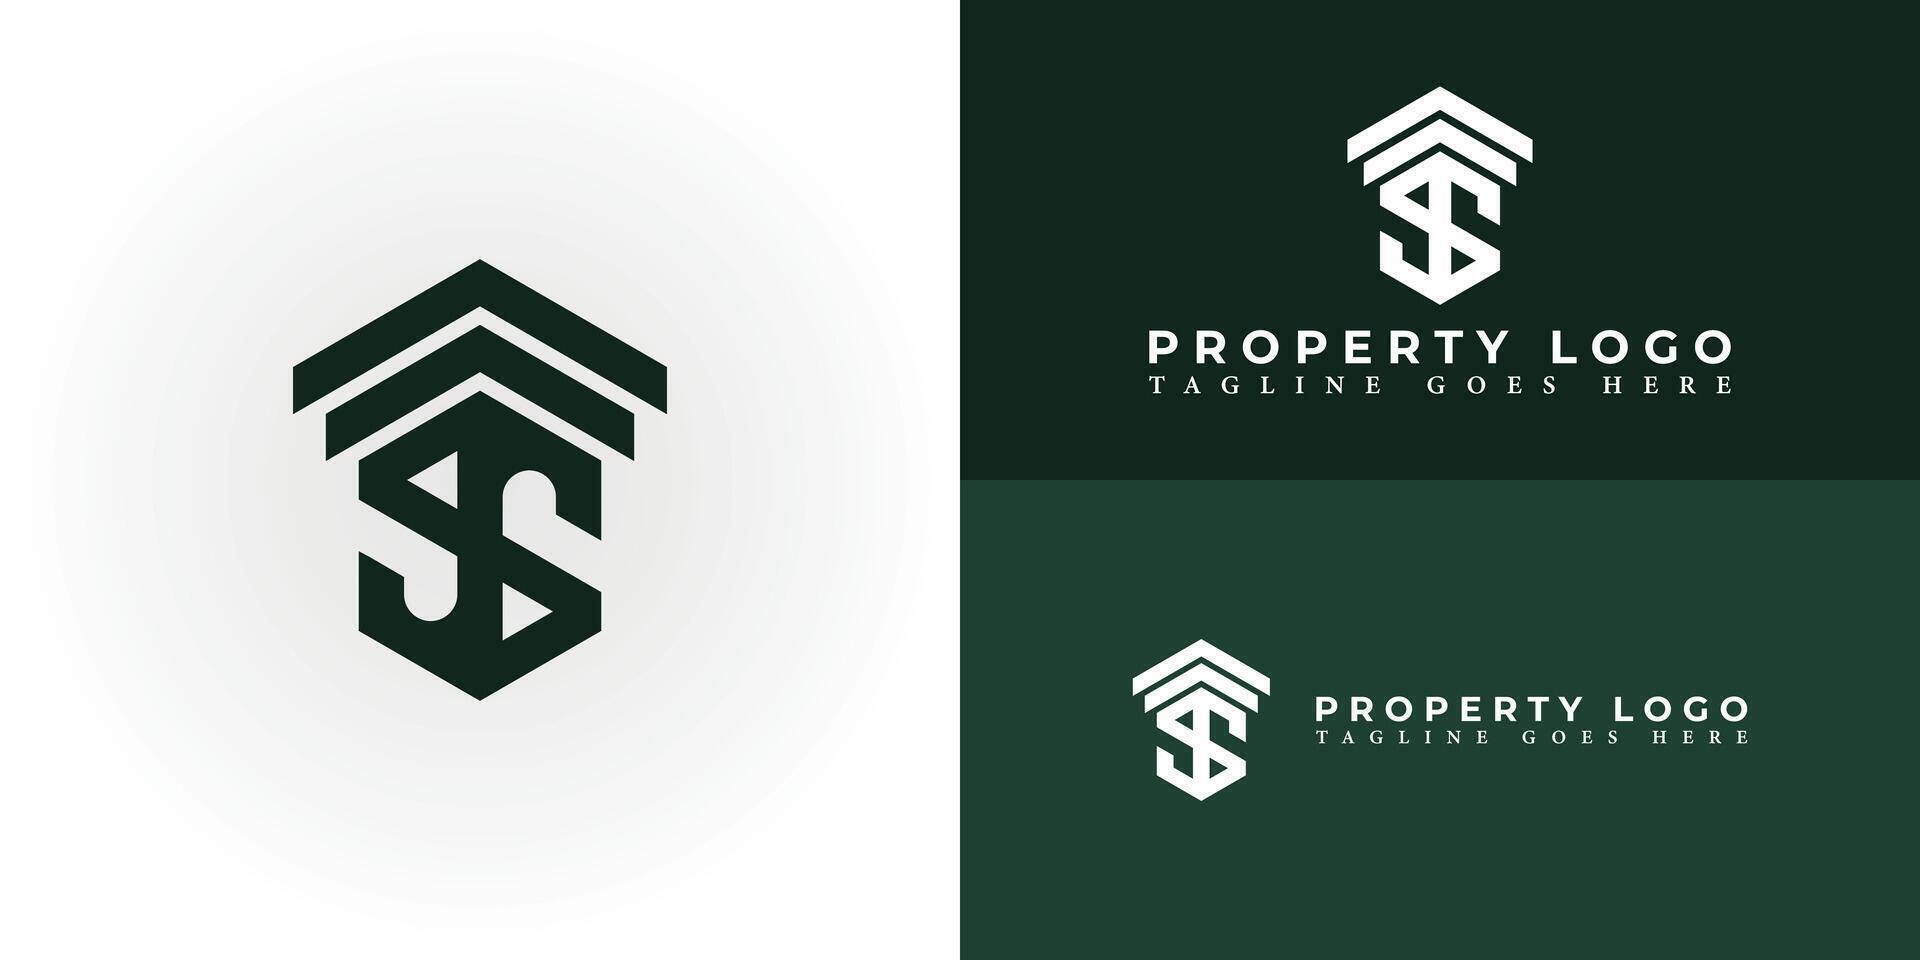 Abstract Letter TS or ST monogram logo design in green color isolated on multiple background colors. Abstract hexagon letter TS or ST logo applied for property and real estate logo design inspiration vector